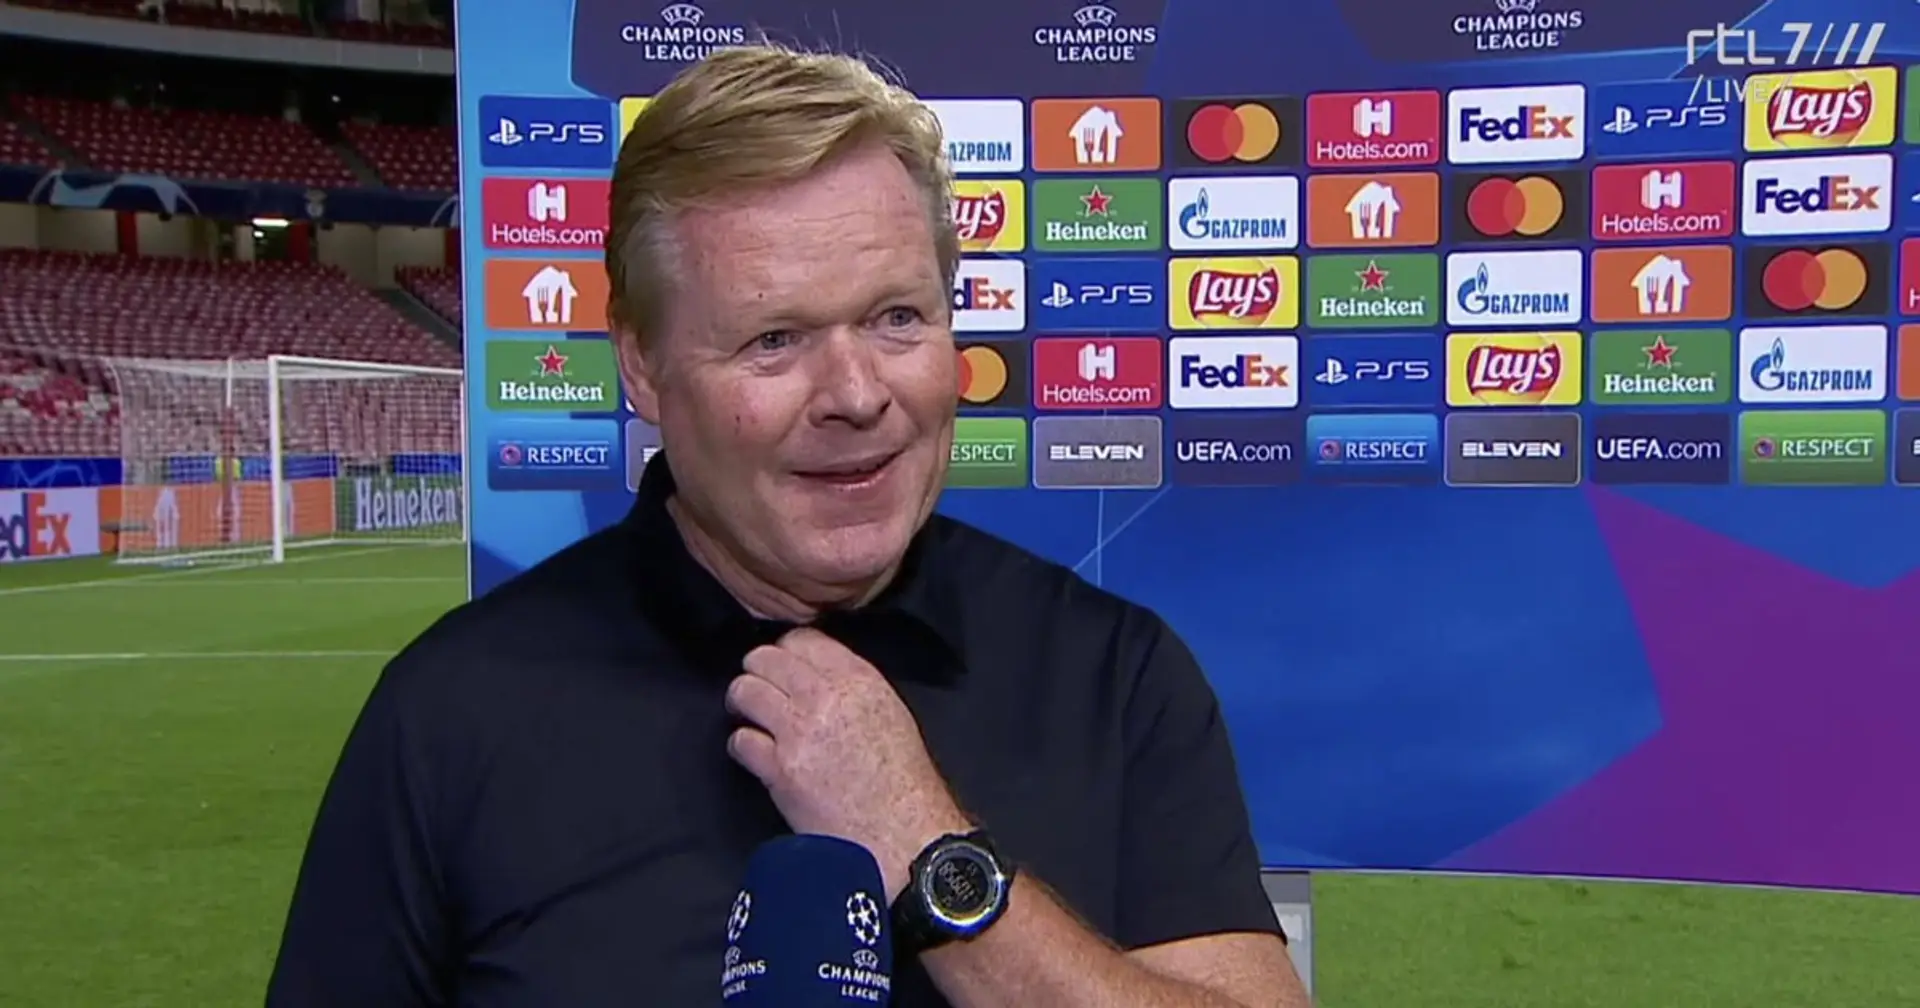 Koeman: The players support me, I don't know about the club